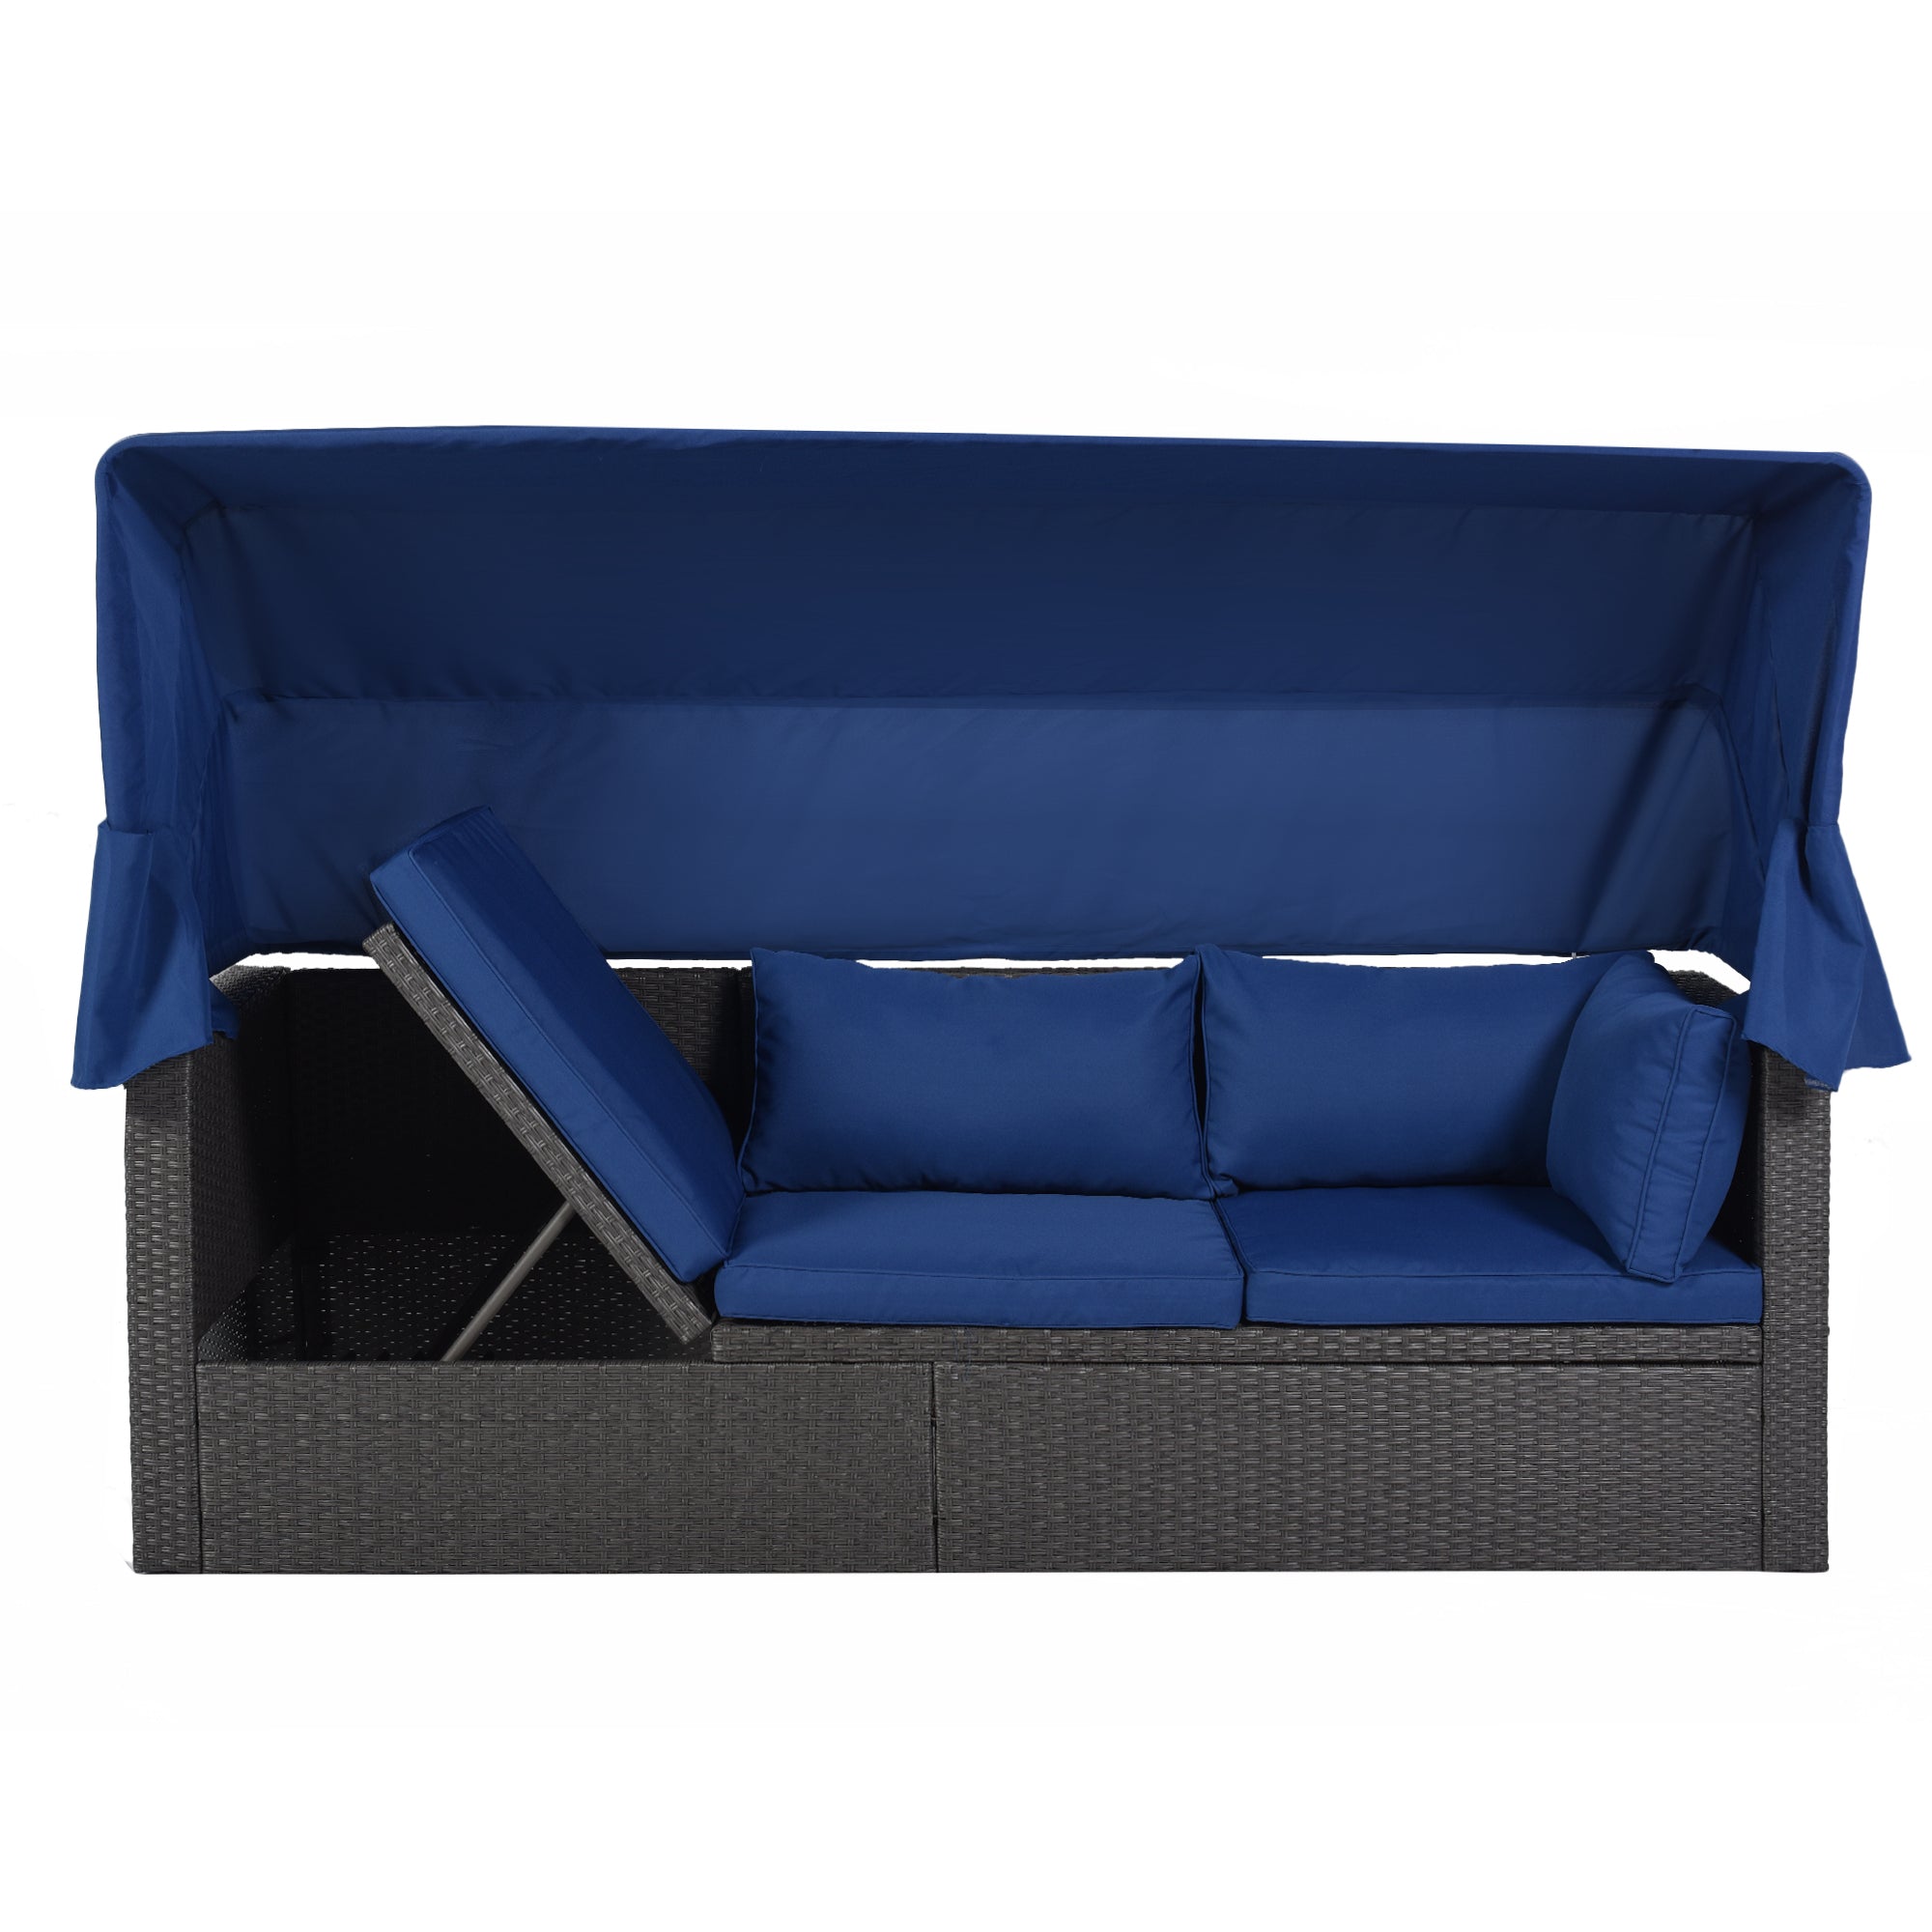 U Style Outdoor Patio Rectangle Daybed with blue-rattan